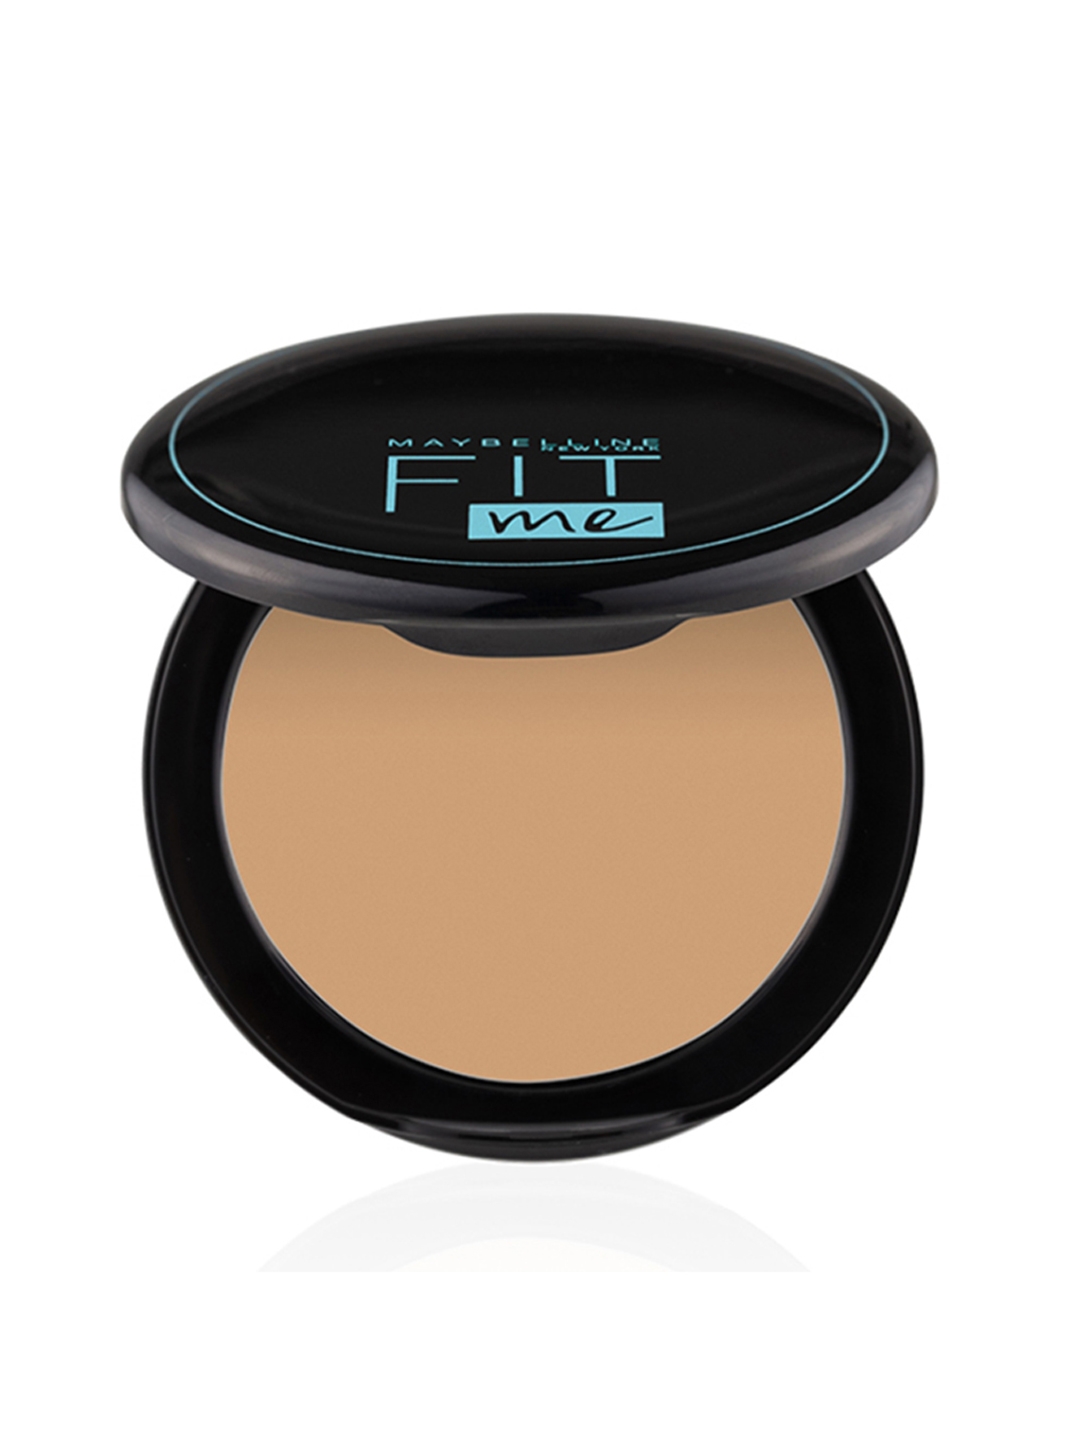 Maybelline New York Fit Me 12Hr Oil Control Compact - Natural Beige 220